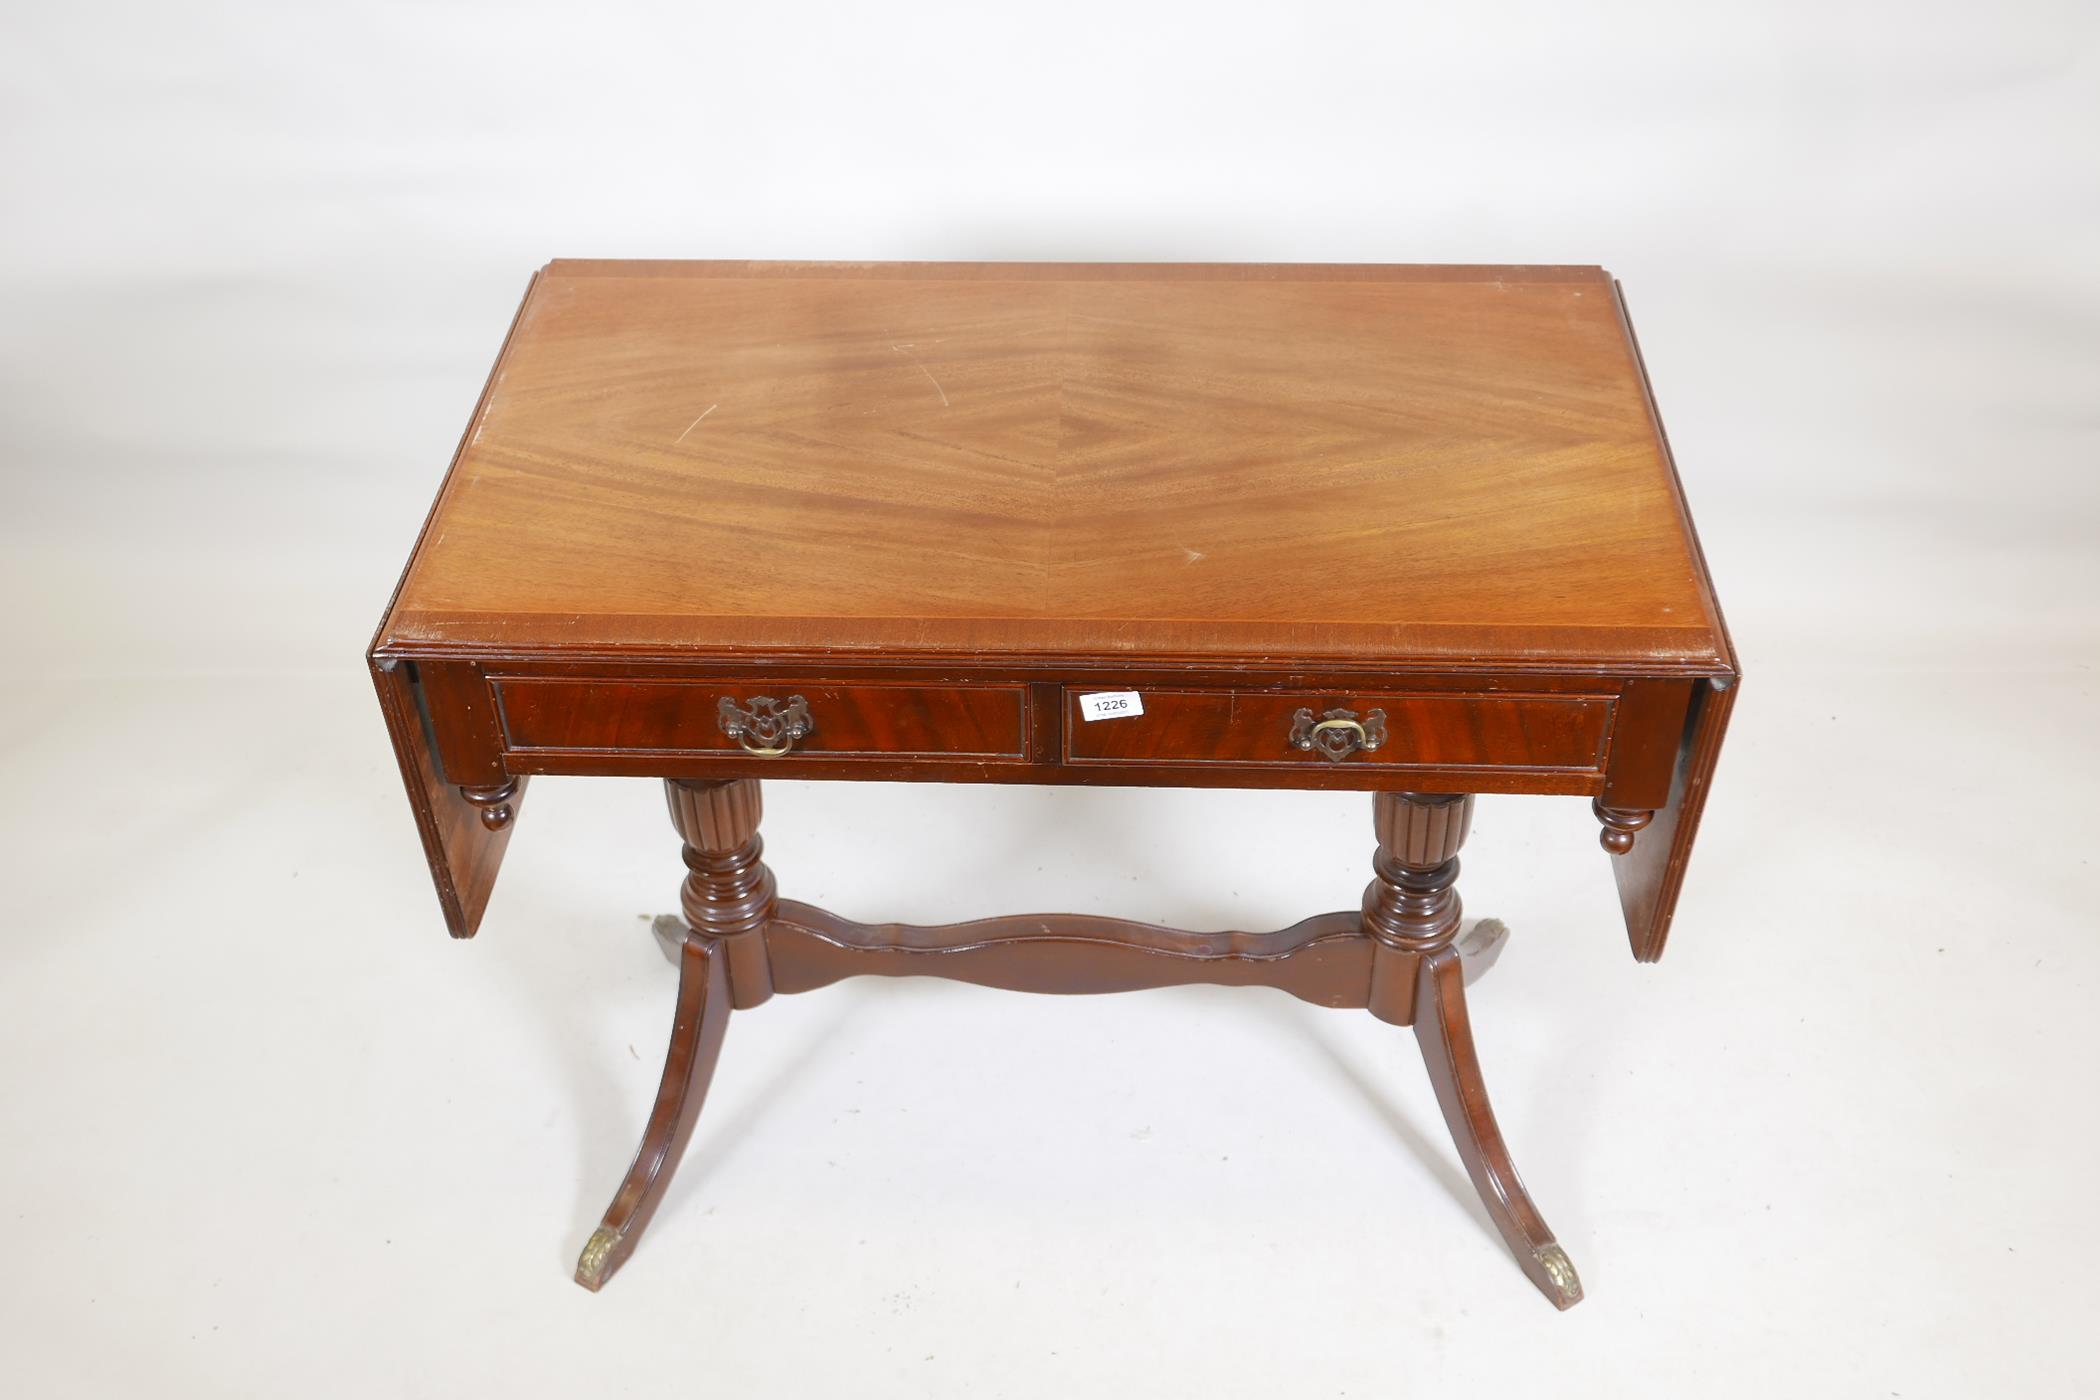 A mahogany veneered two drawer sofa table, with pierced plate handles, 36" x 20" x 29" - Image 2 of 4